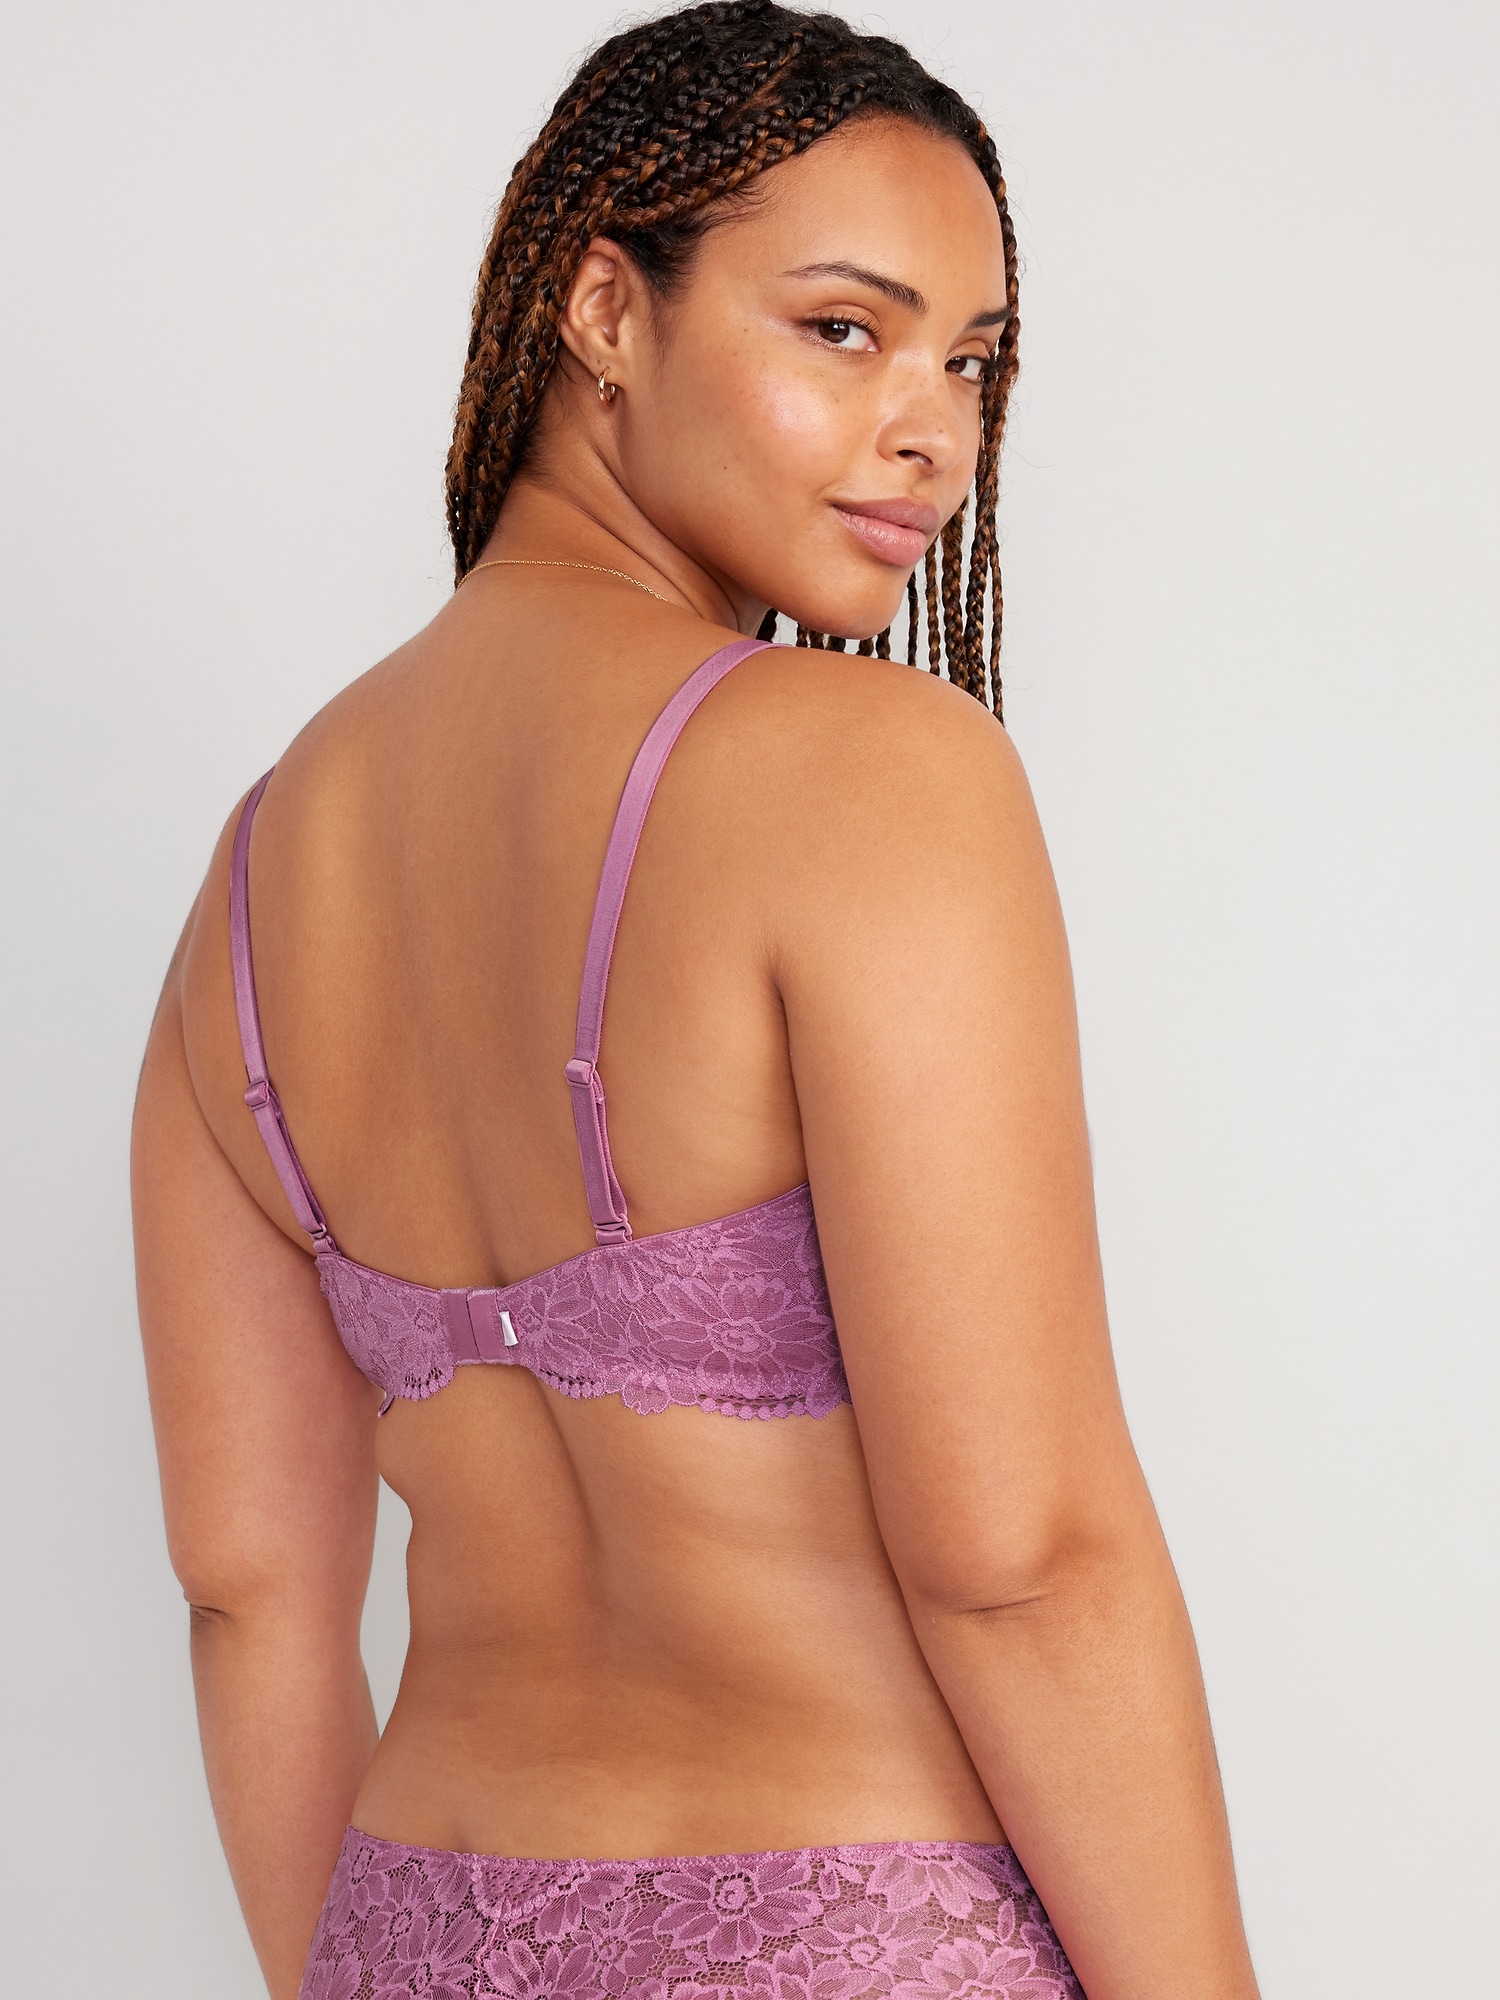 NWOT Cacique Invisible Lace Backsmoother Balconette Bra Purple